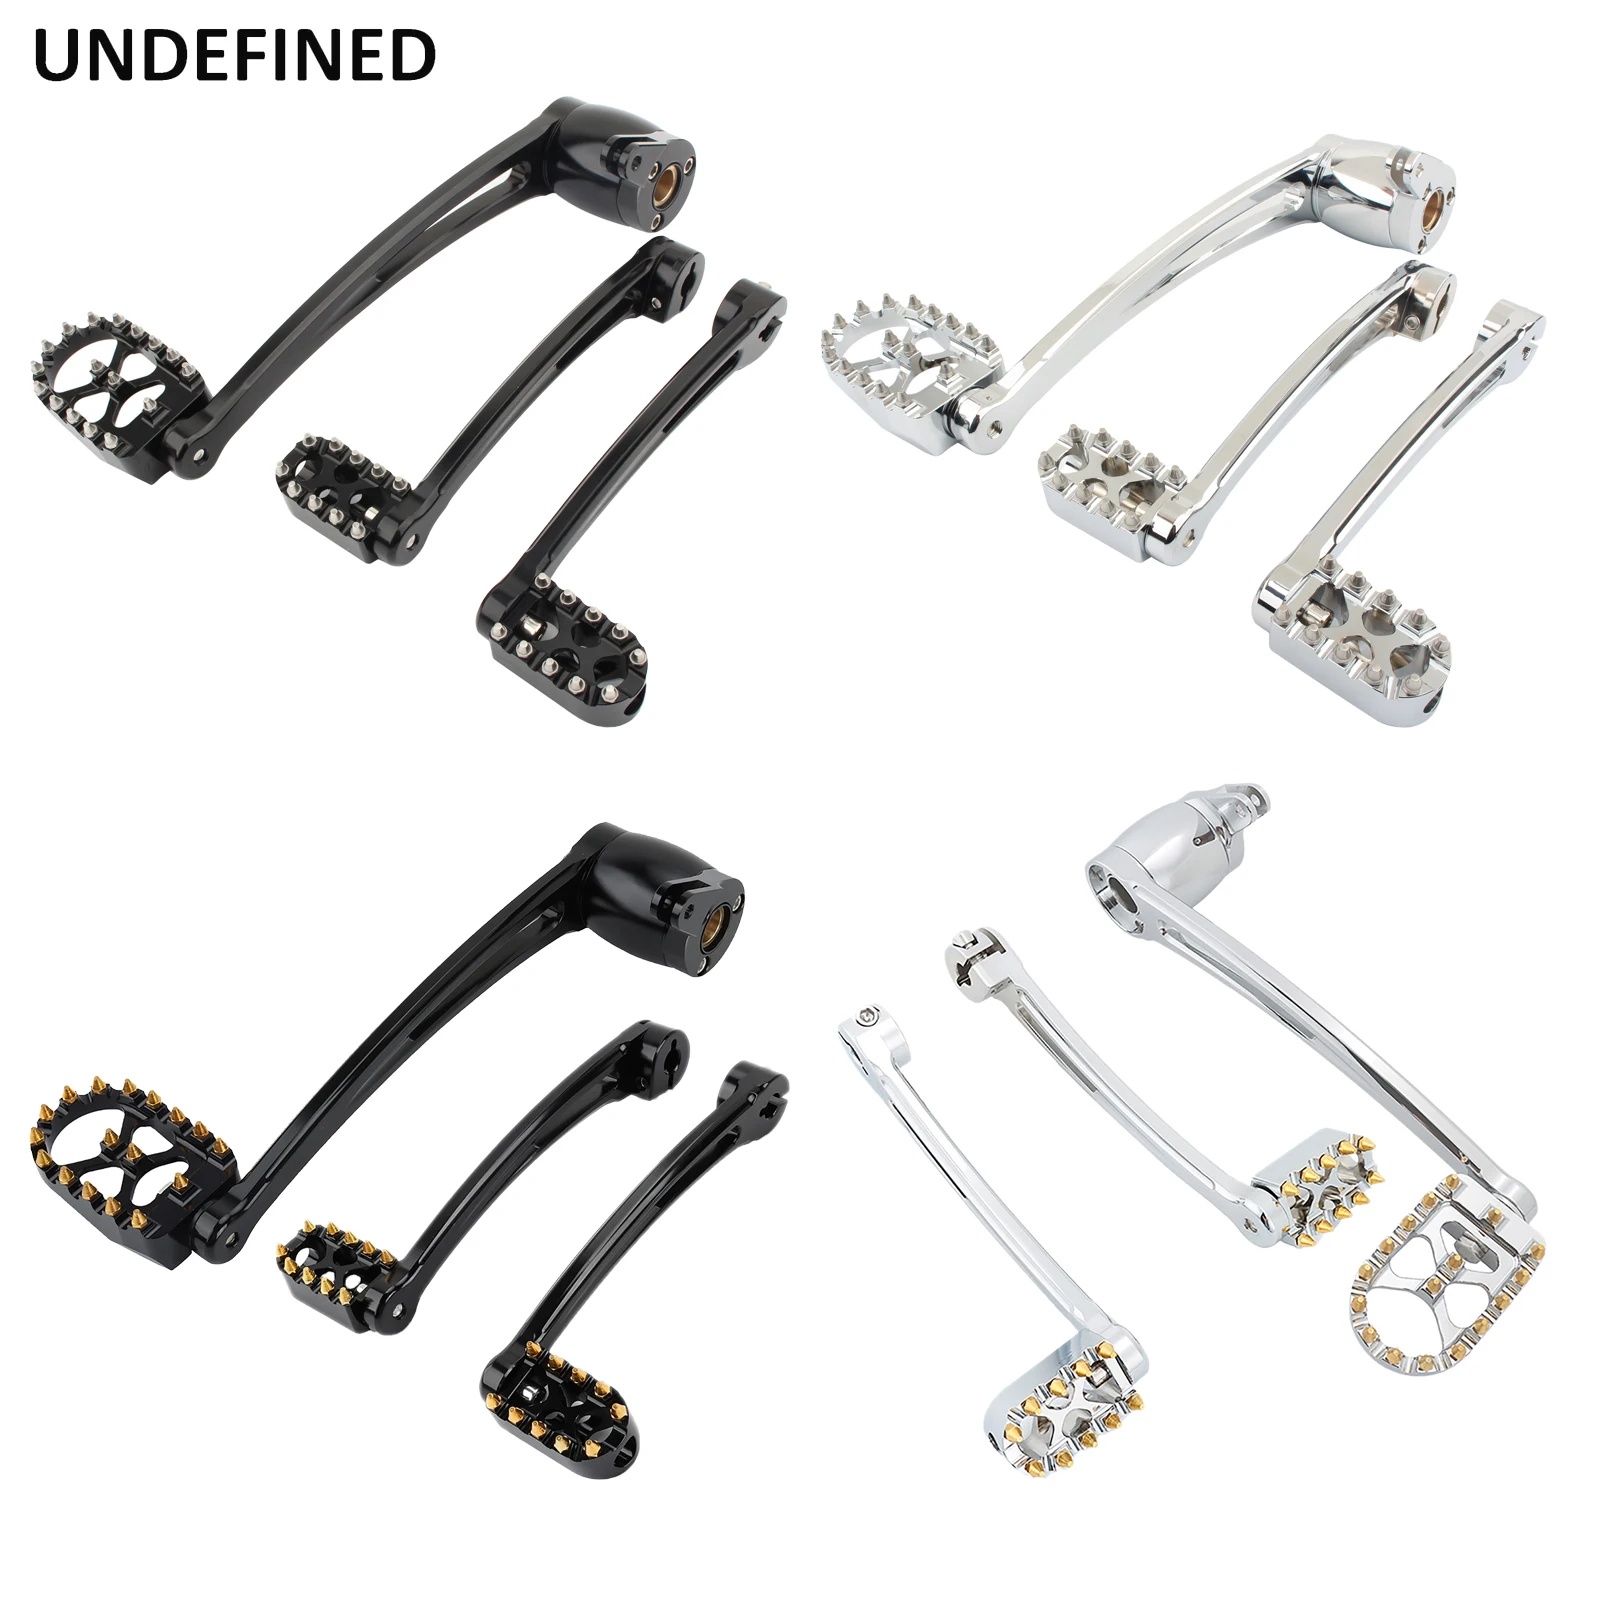 Motorcycle Brake Arm Kit MX Offroad Heel Shift Lever Shifter Pegs For Harley Touring Road King Street Road Glide Trike 2008-2013